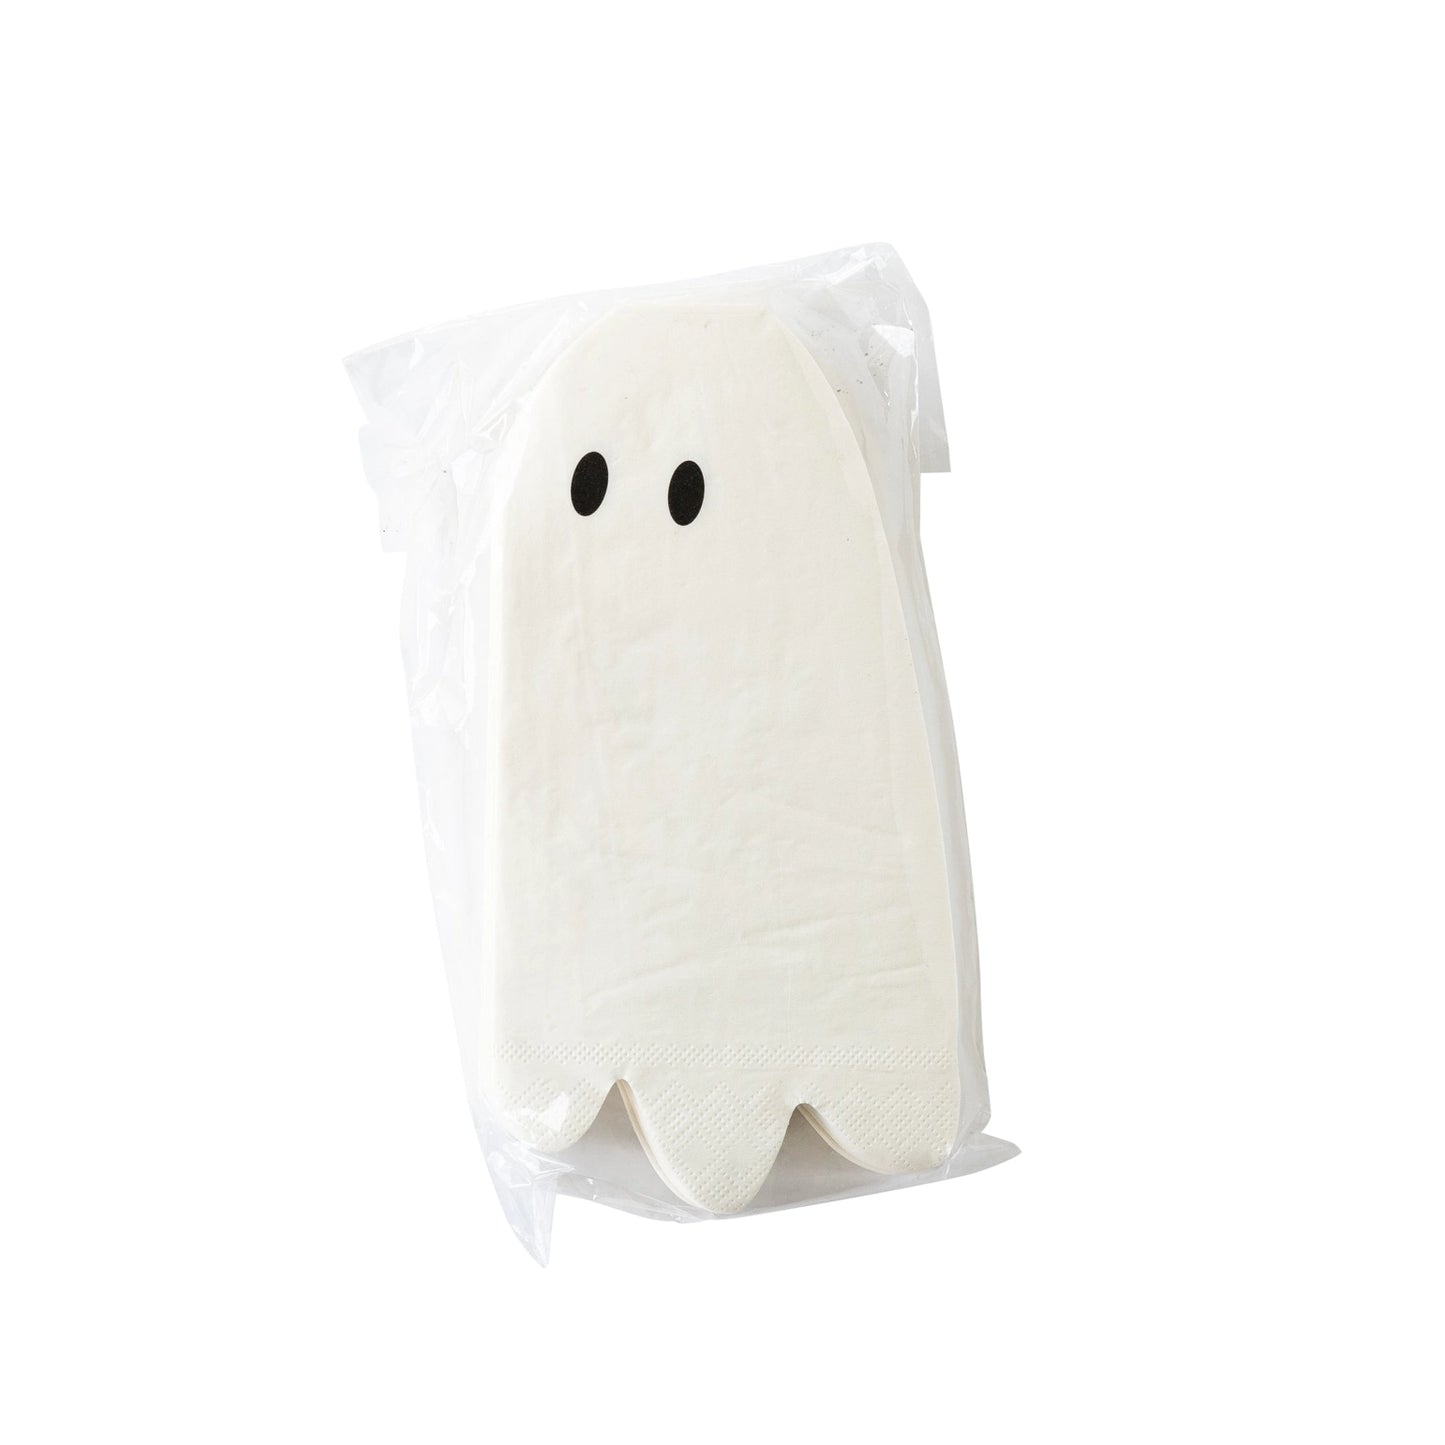 GHOST SHAPED NAPKINS